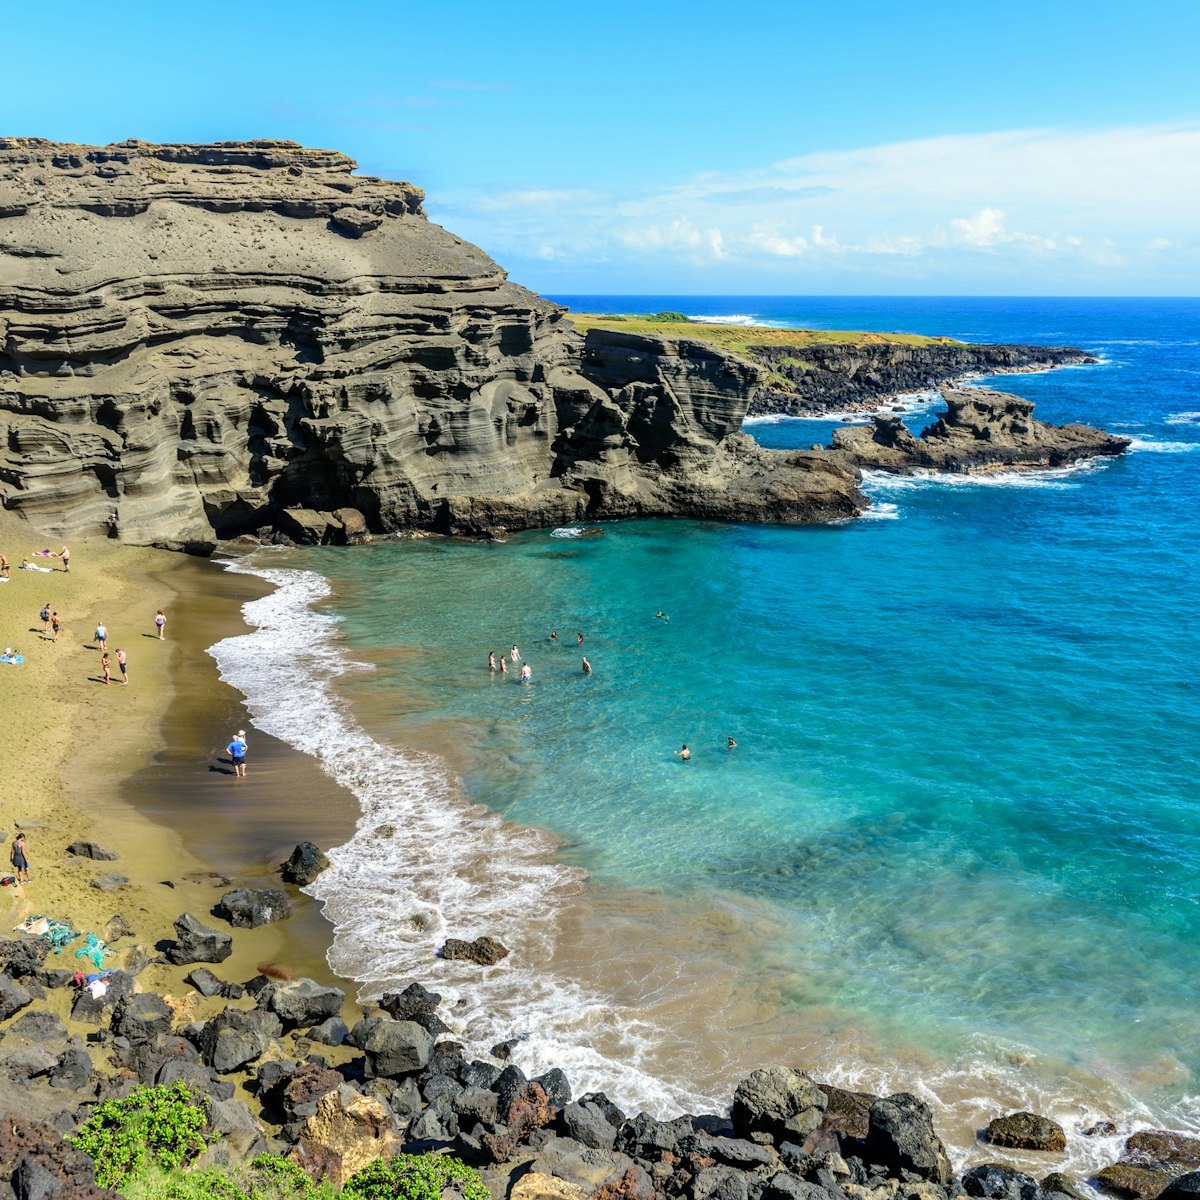 Green sand beach is located near South Point on the island of Hawaii. It is one of the only four green sand beaches in the world.